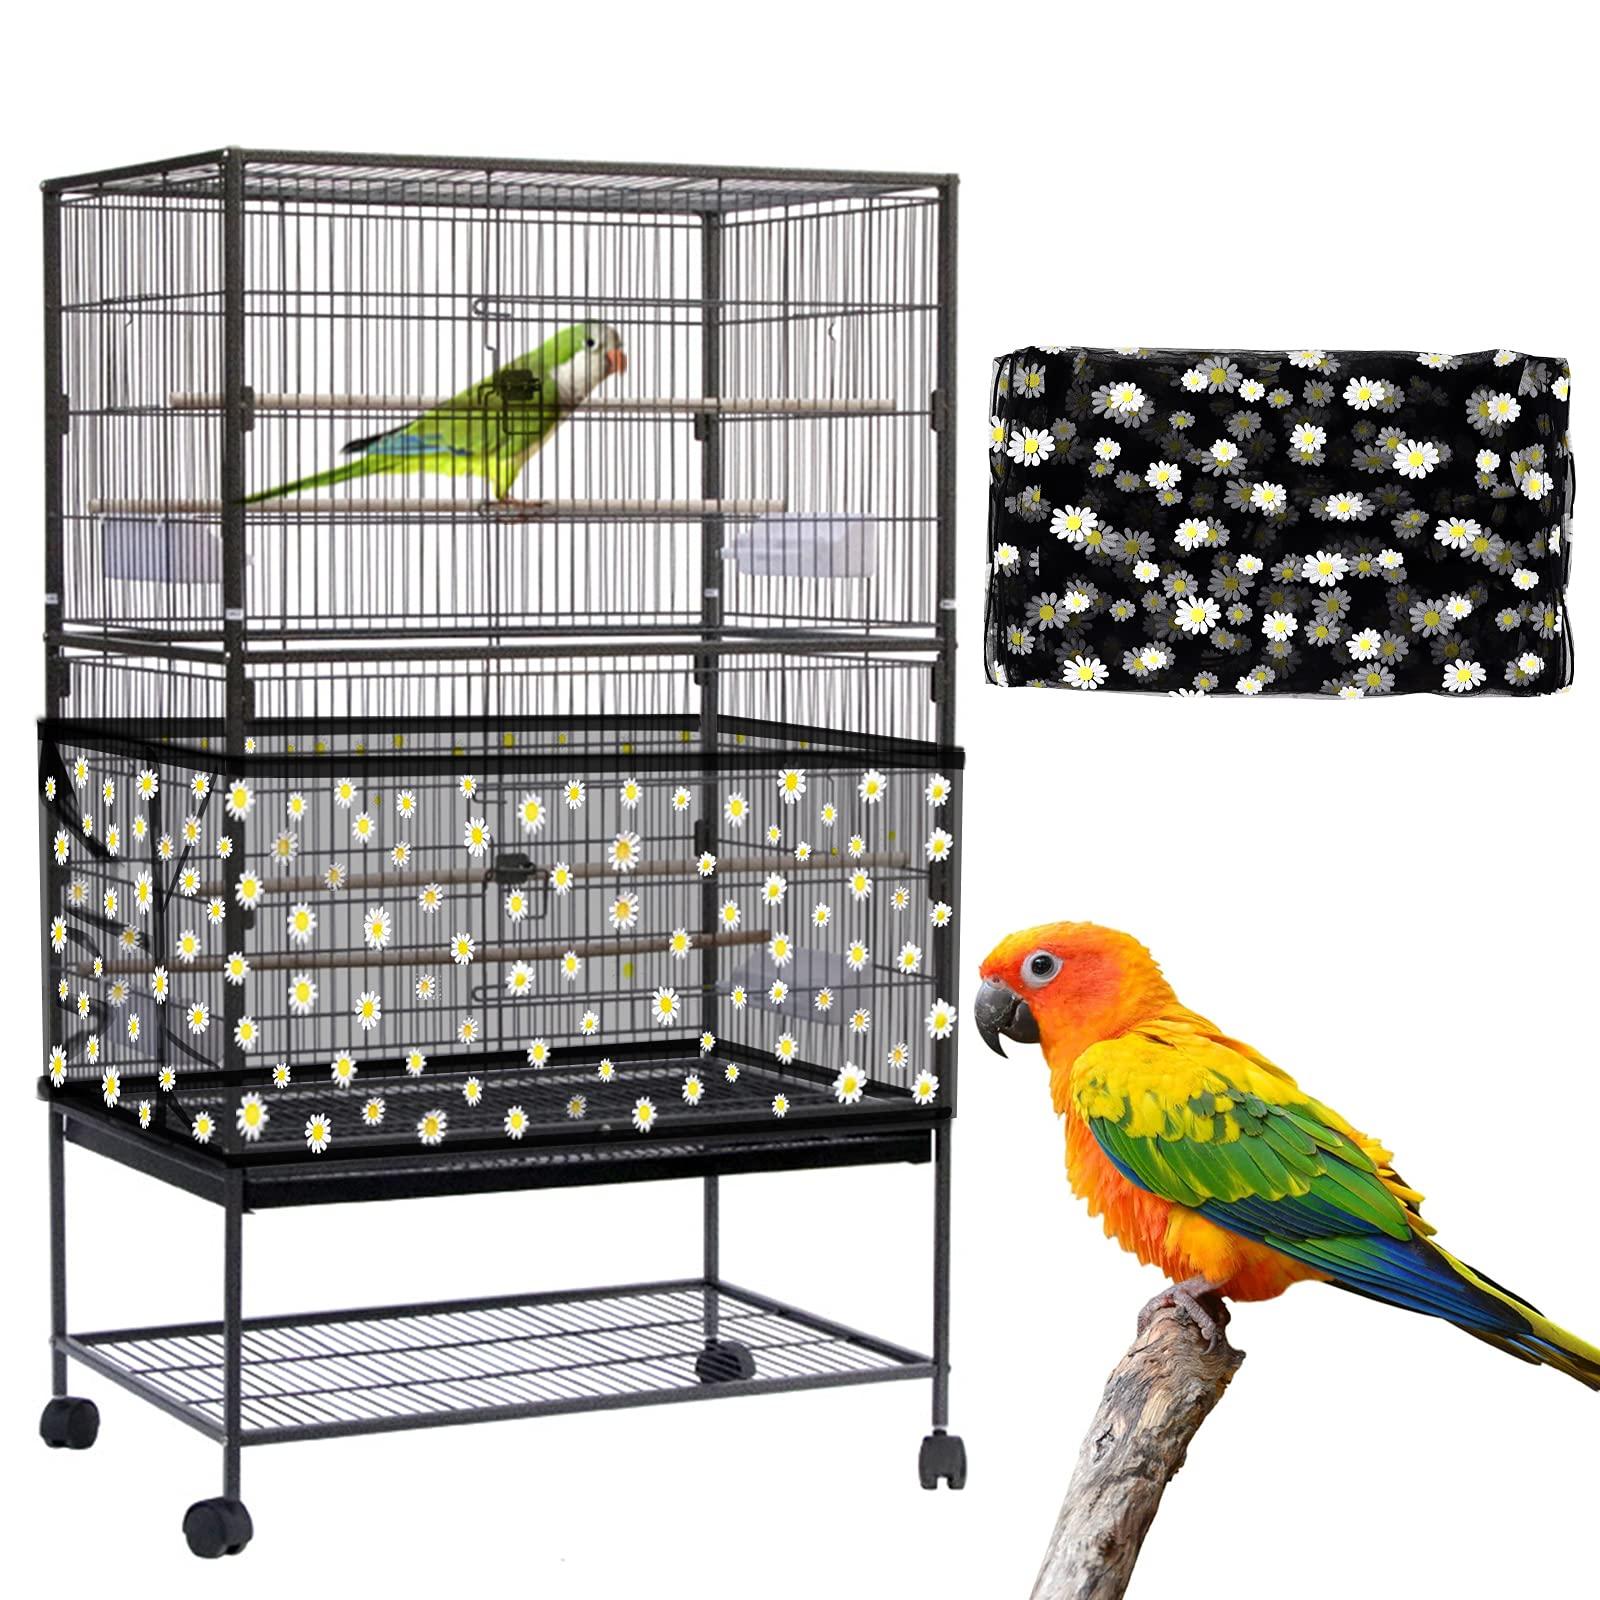 Daoeny Large Bird cage cover, Bird cage Seed catcher, Adjustable Soft Nylon Mesh Net with Daisy Pattern, Birdcage cover Skirt Seed guard for Parrot Parakeet Macaw Round Square cages (Black)